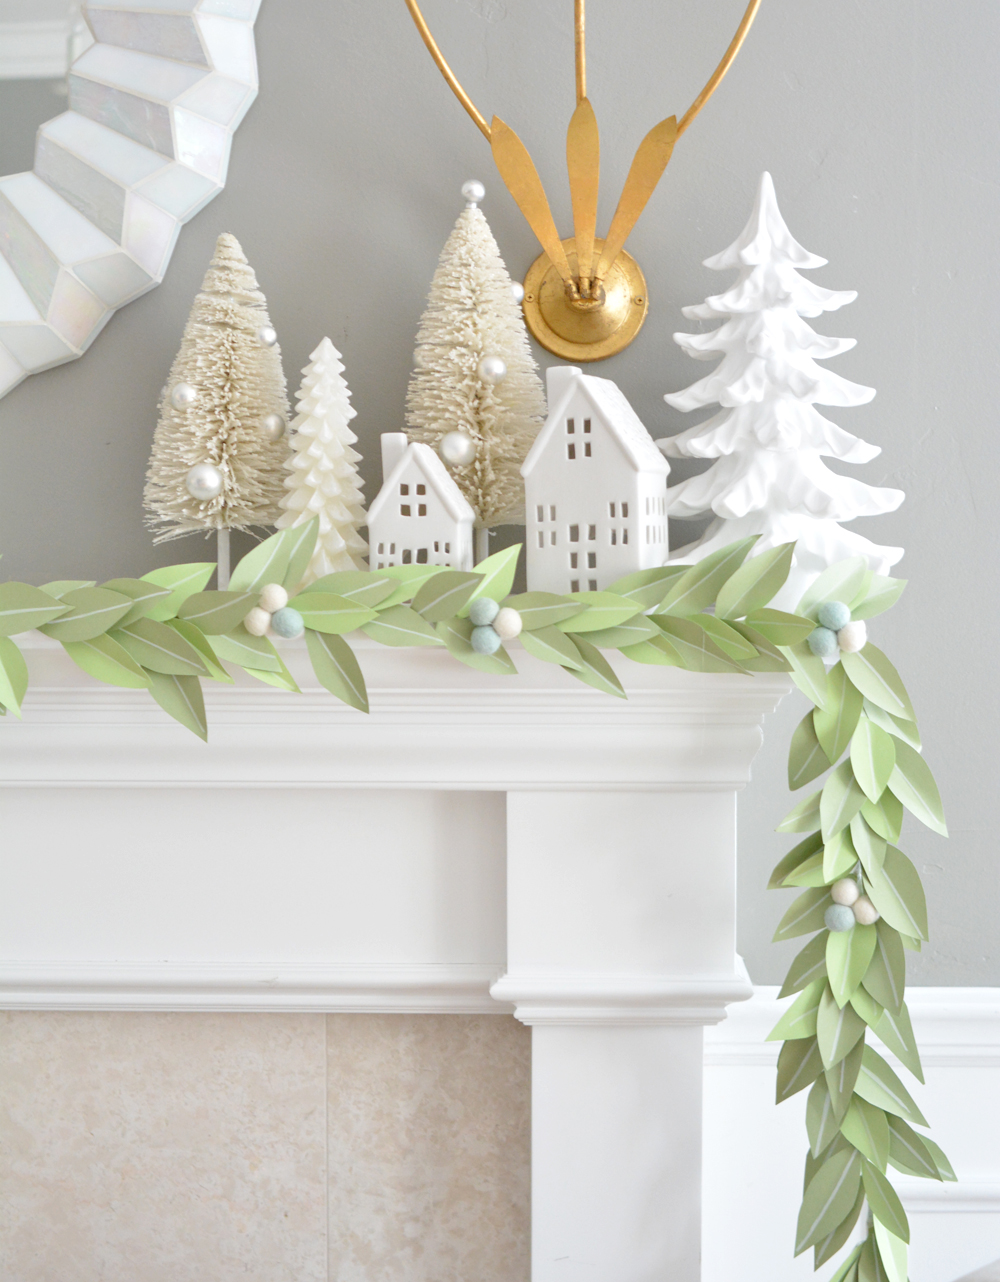 How to Make An Oversized Paper Christmas Garland - Paper Garland Tutorial